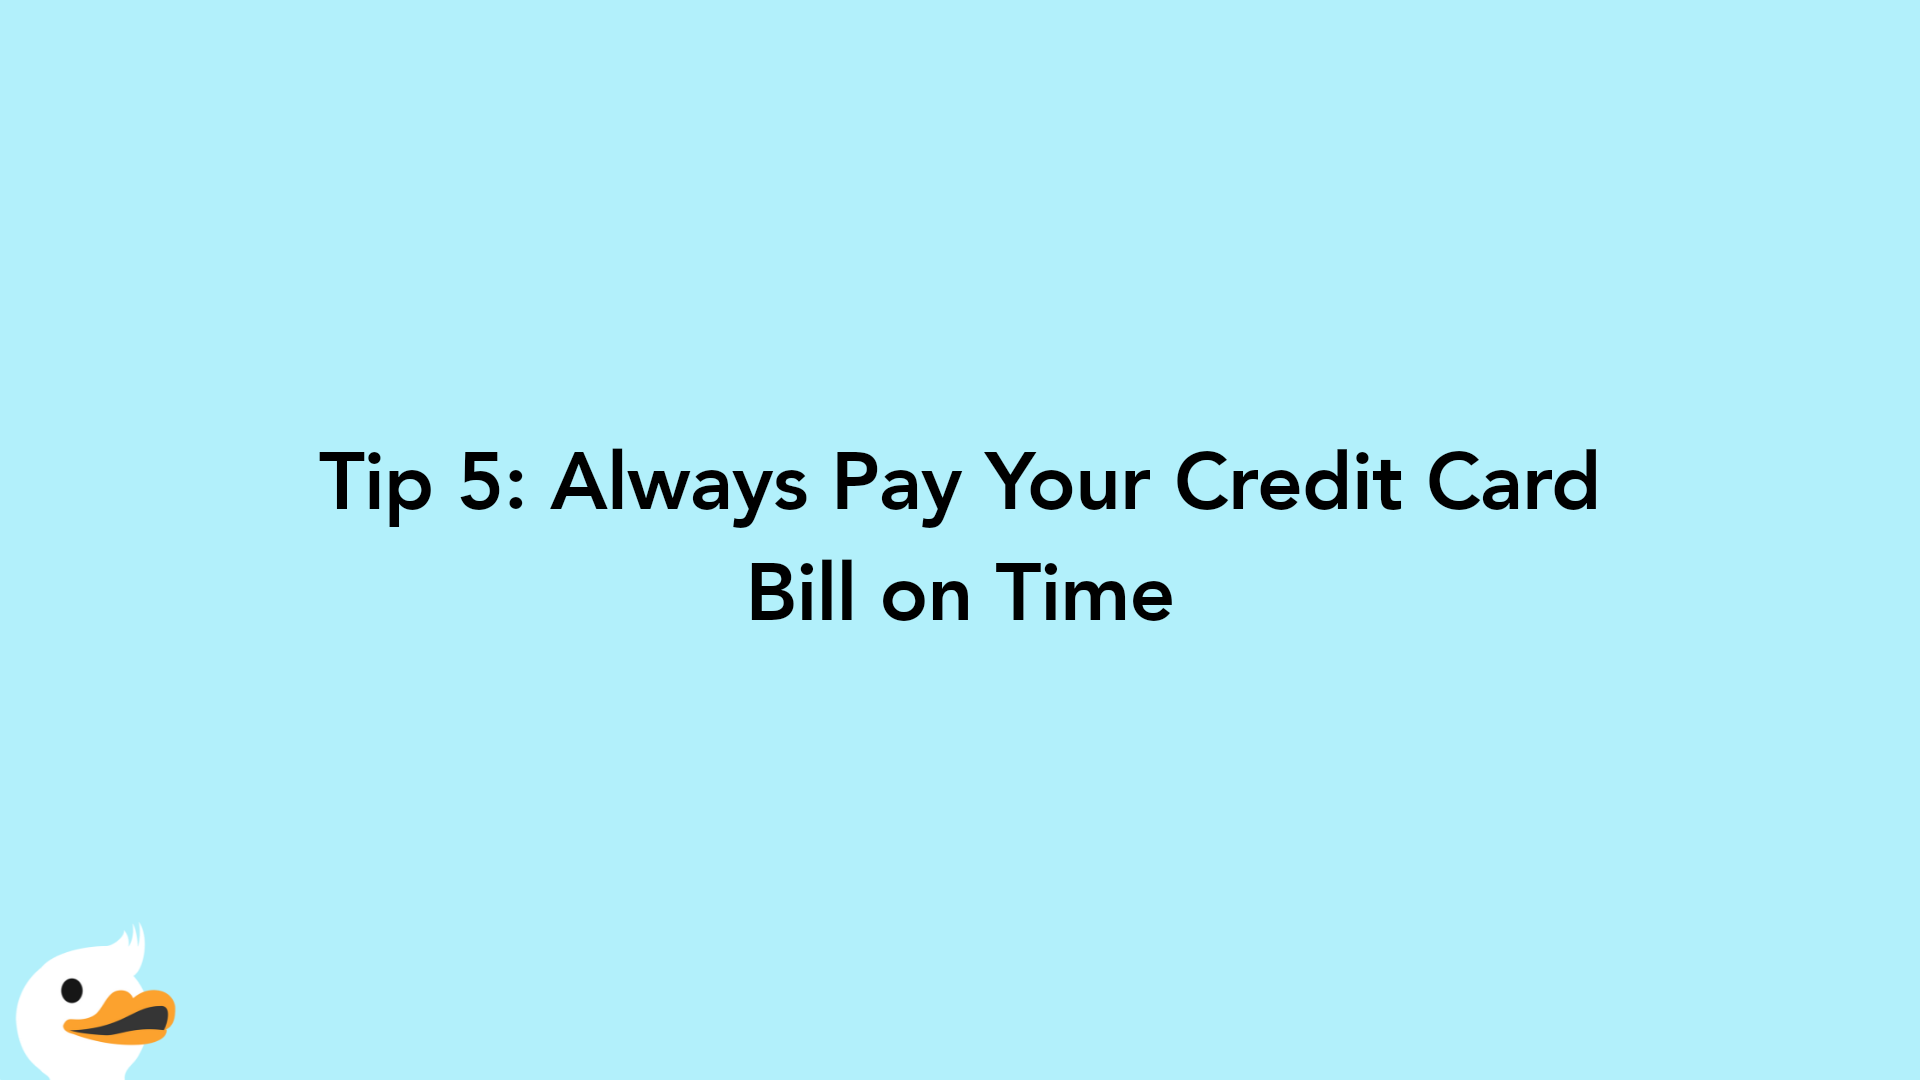 Tip 5: Always Pay Your Credit Card Bill on Time